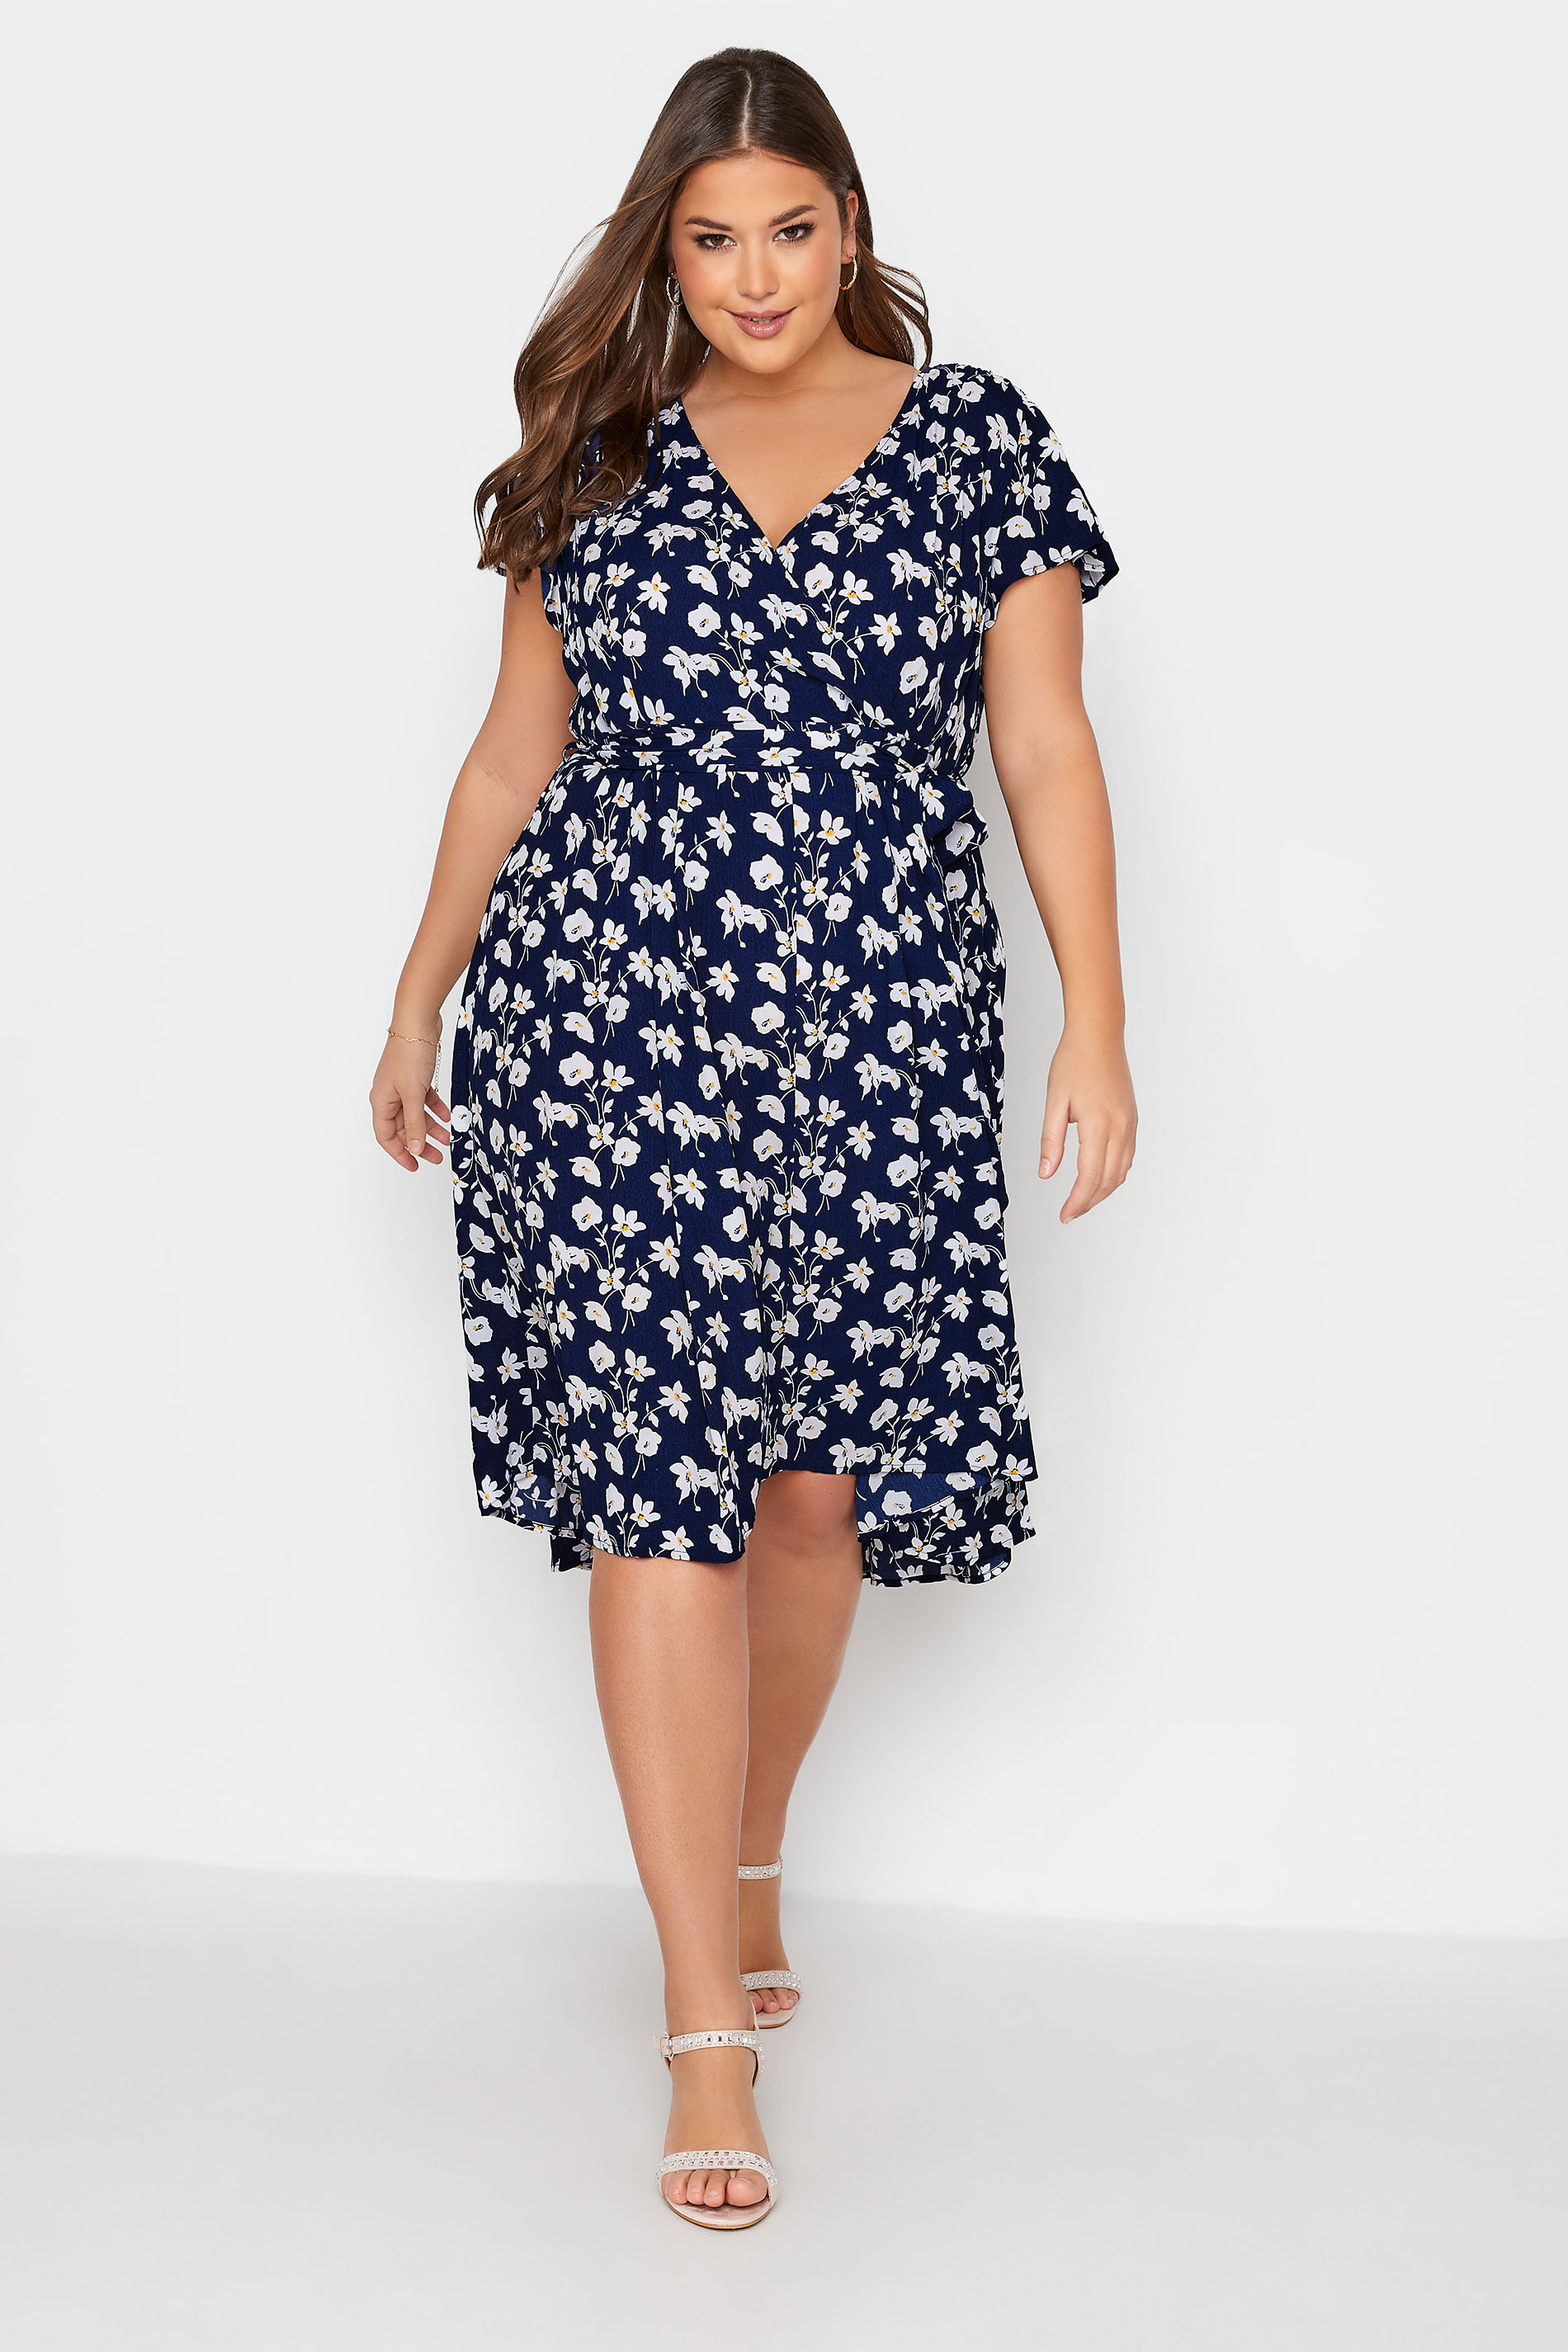 Robes Grande Taille Grande taille  Robes Portefeuilles | YOURS LONDON - Robe Midi Bleue Marine Floral Cache-Coeur - UK74910